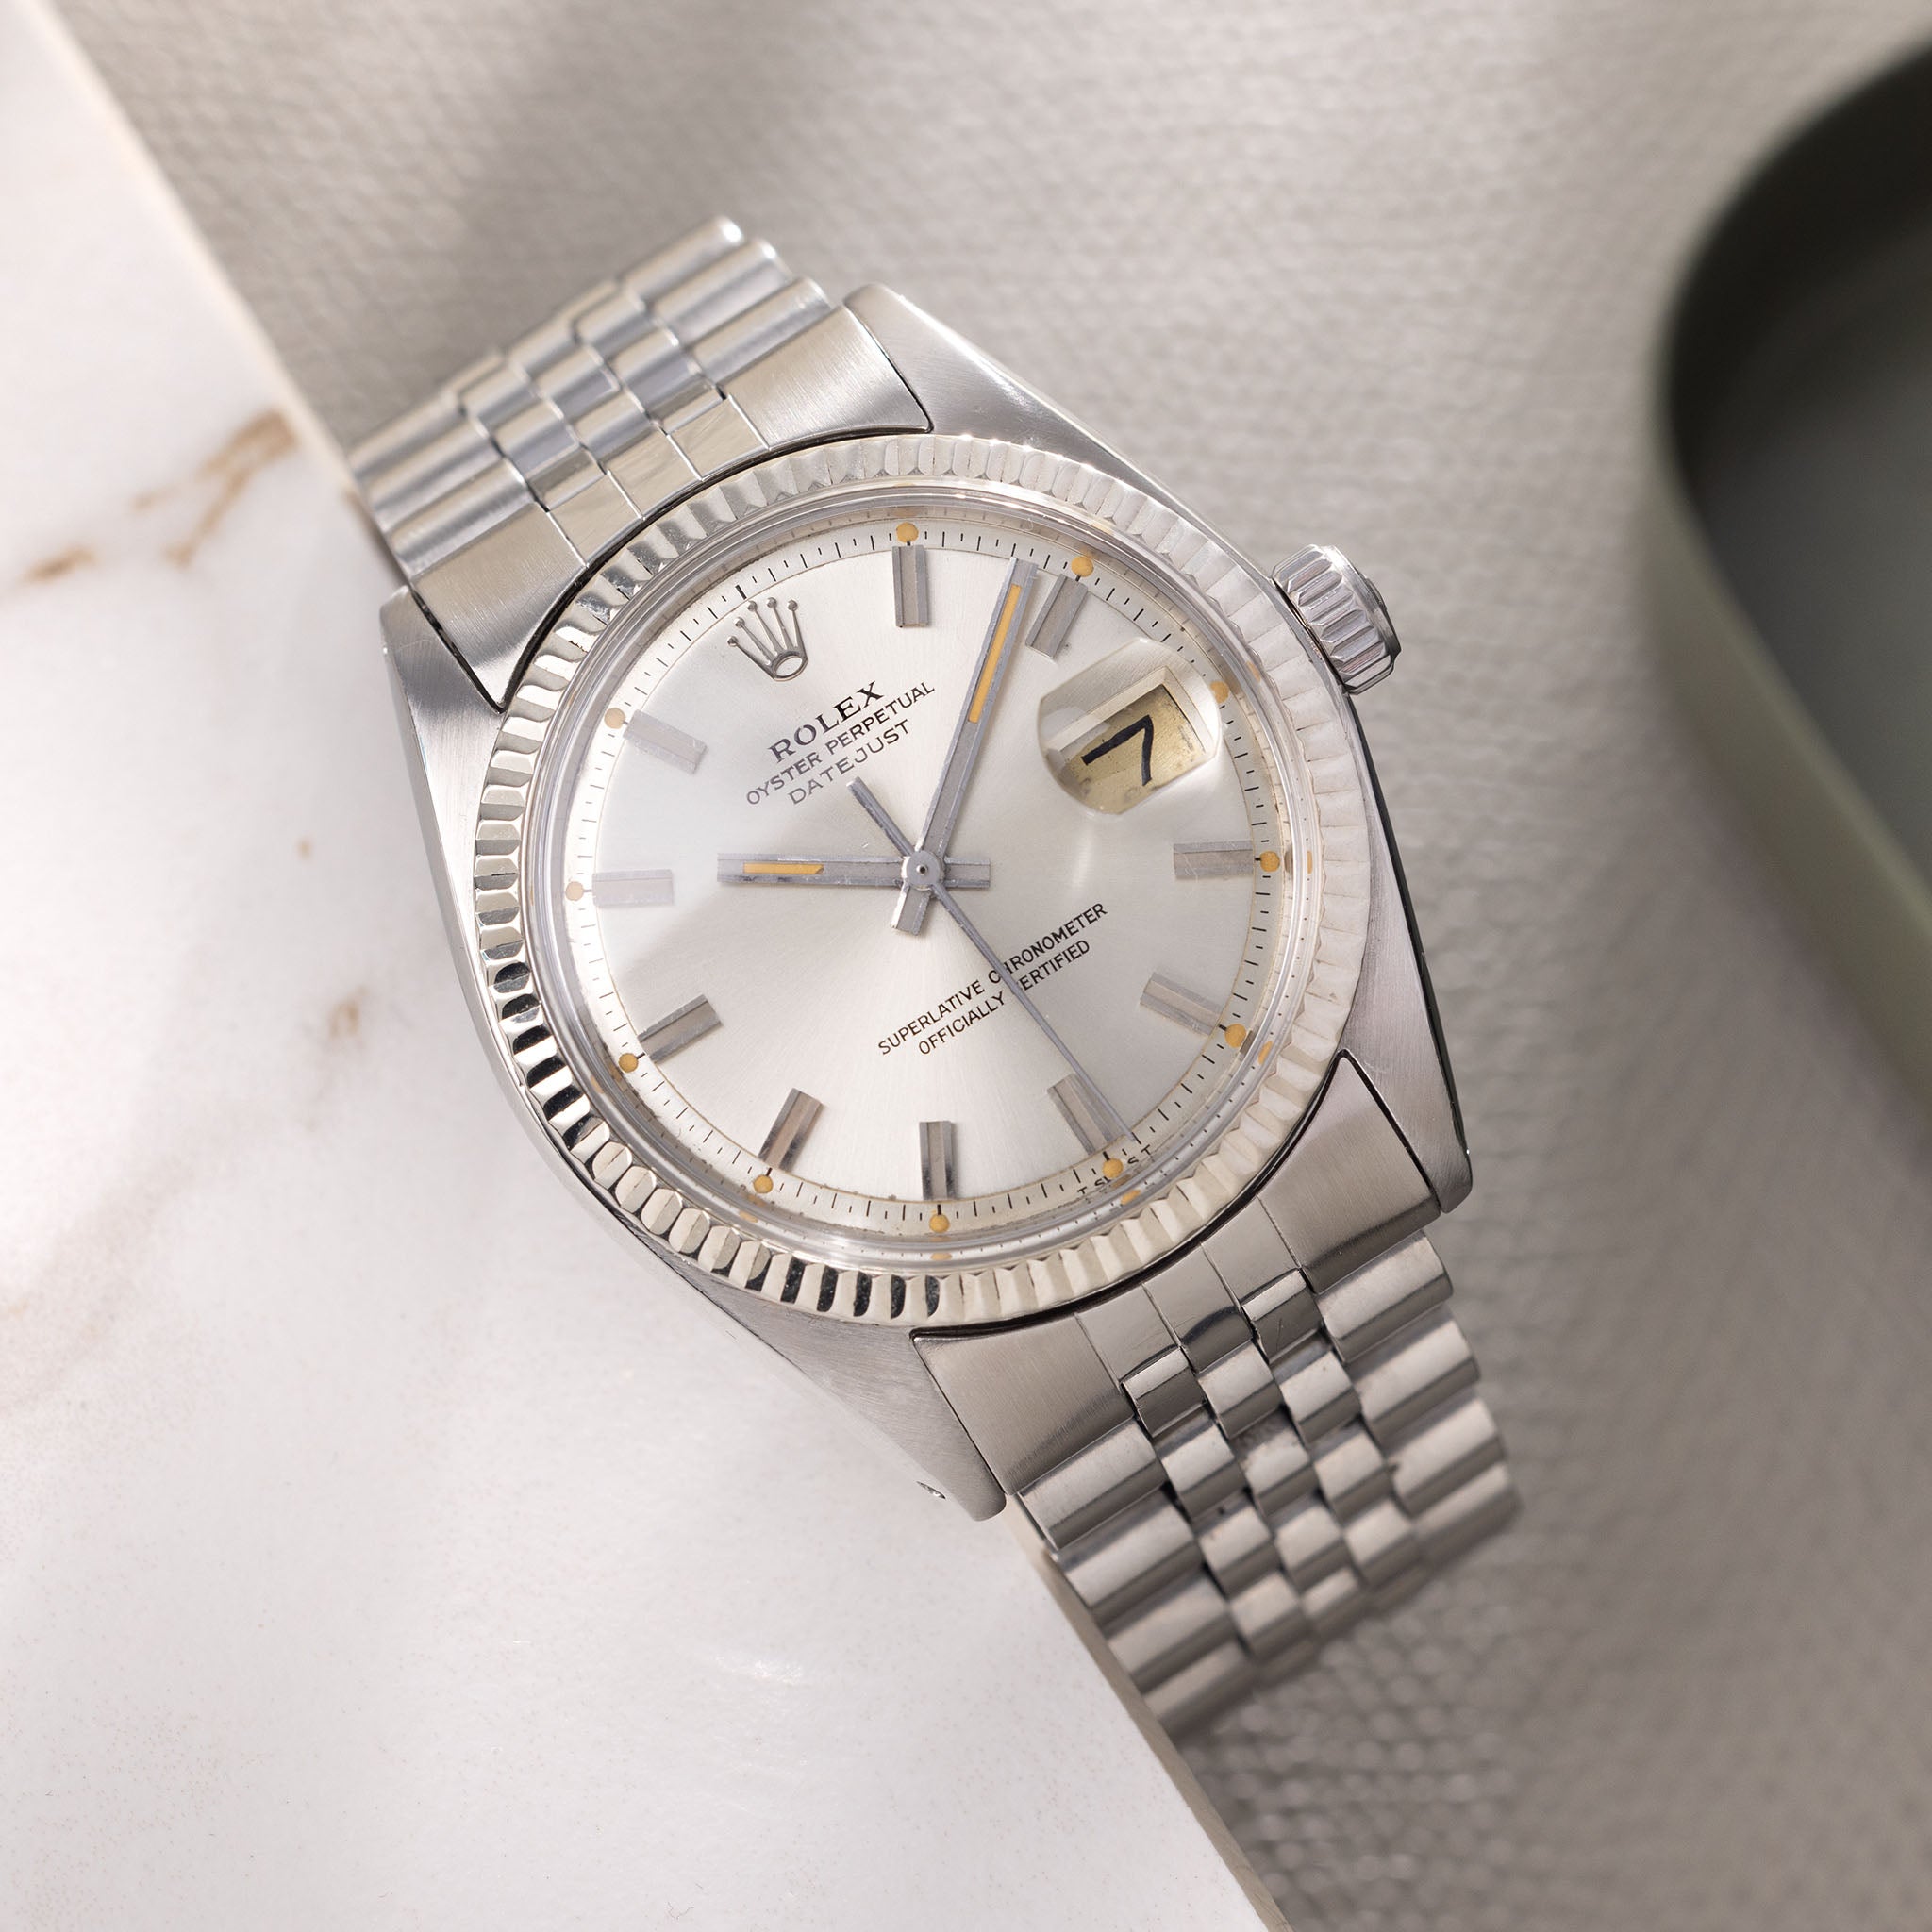 Datejust Wide Boy Dial